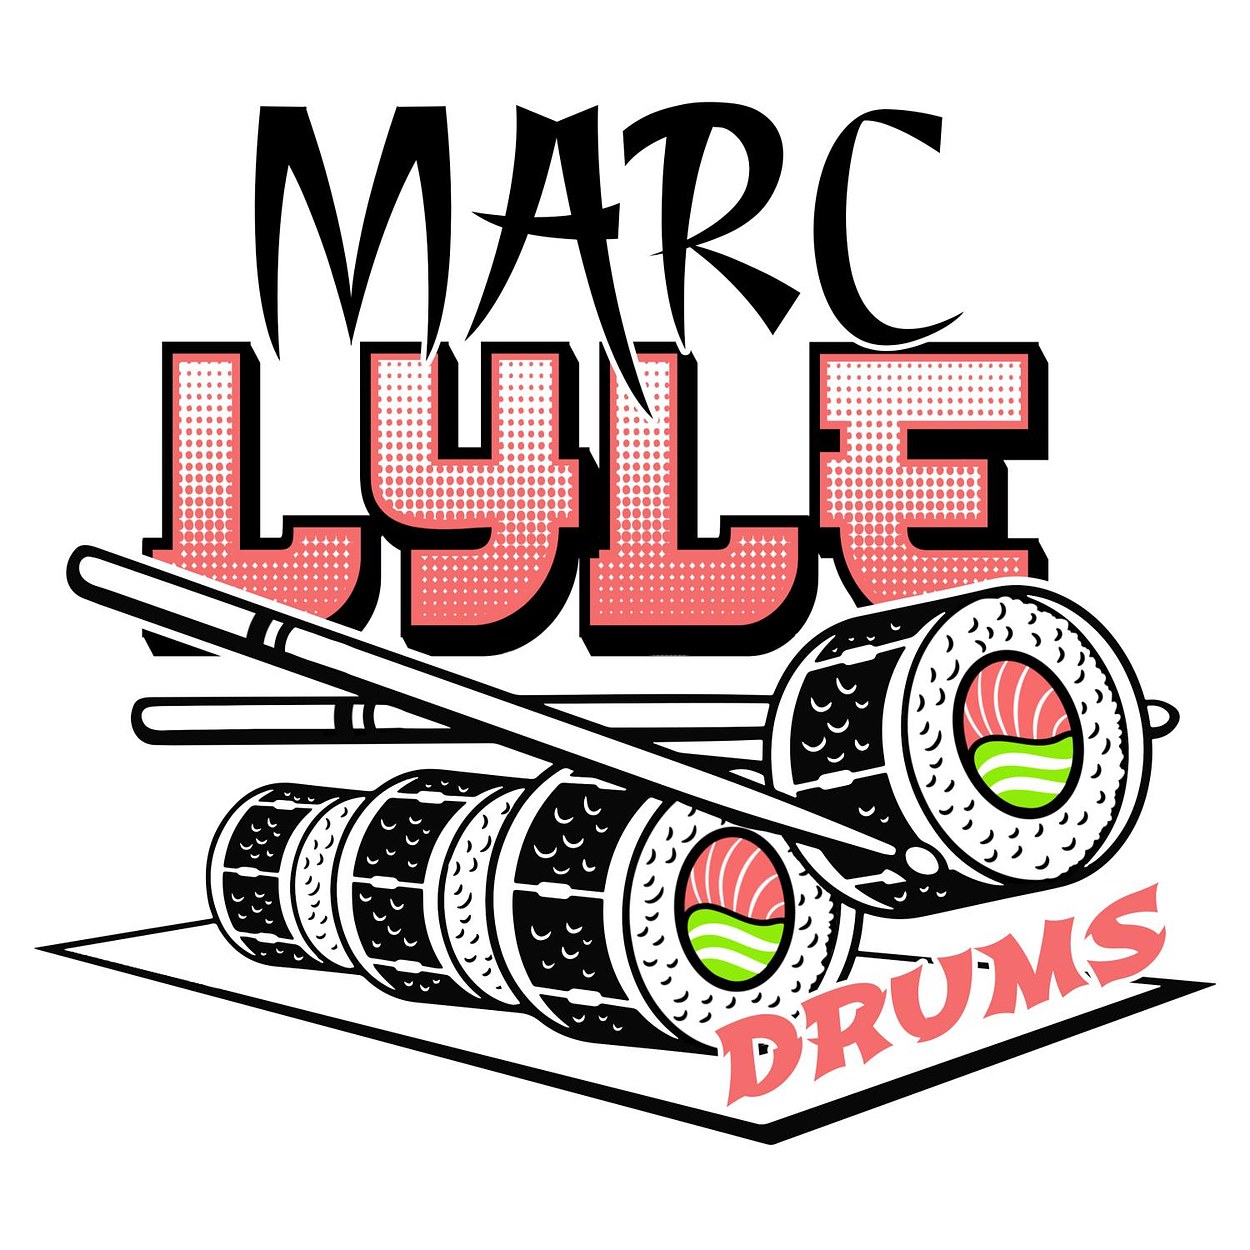 Marc Lyle Drums - Social Media and Bass Drum Graphic